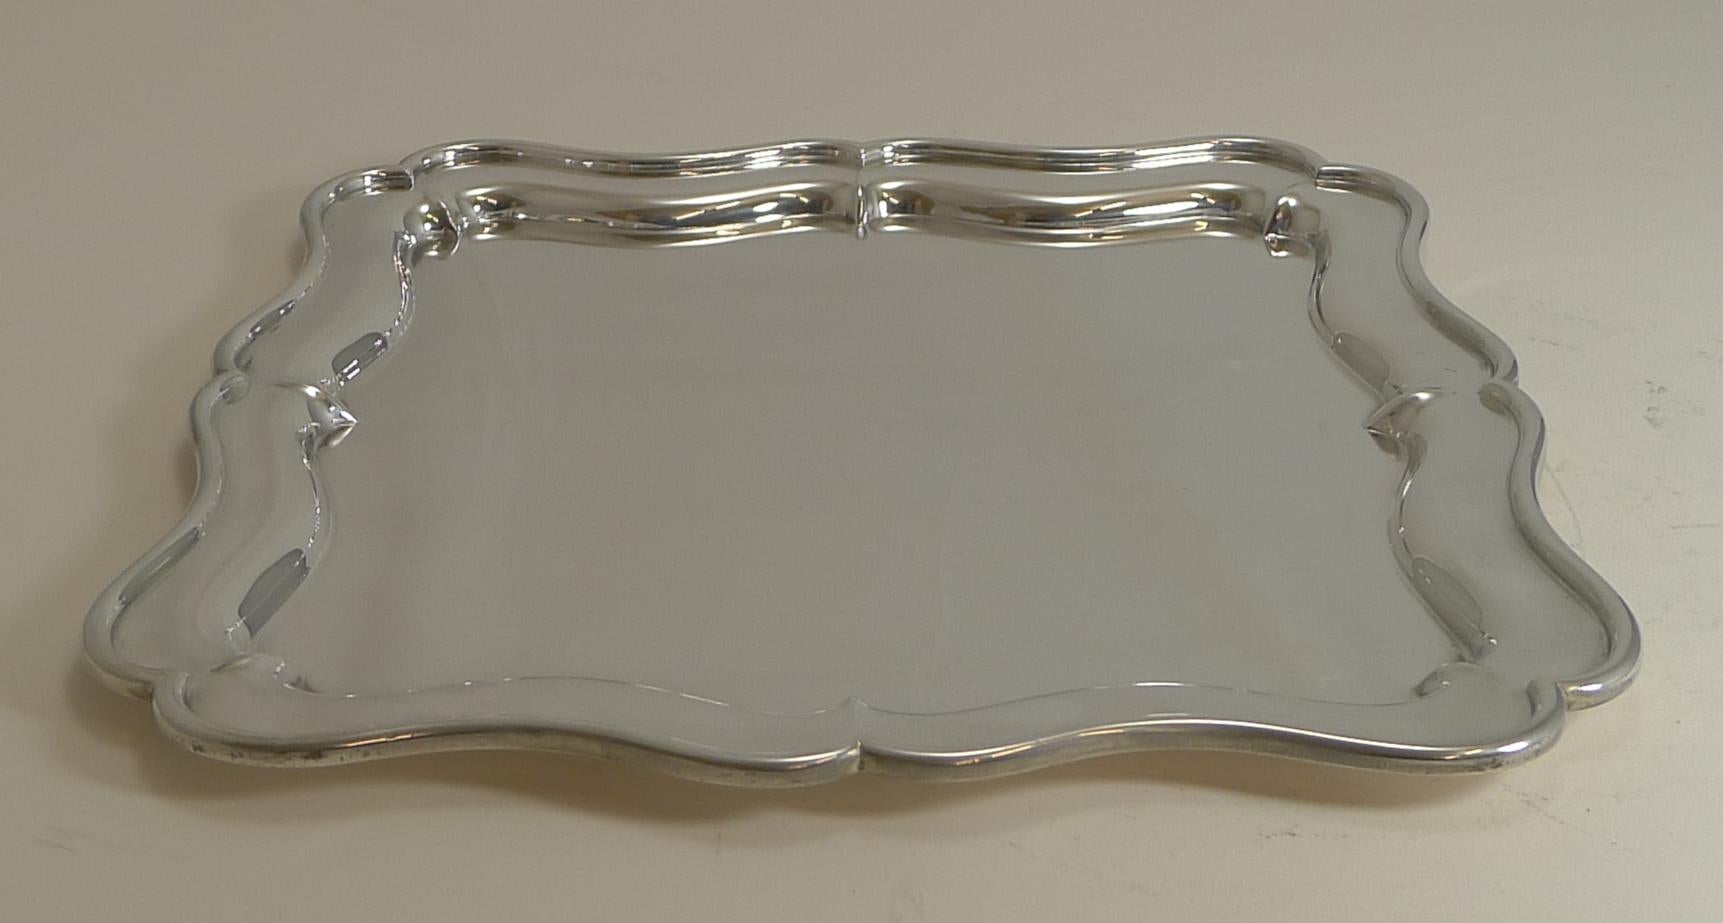 Edwardian Antique English Silver Plated Cocktail / Drinks Tray by Martin Hall, circa 1900